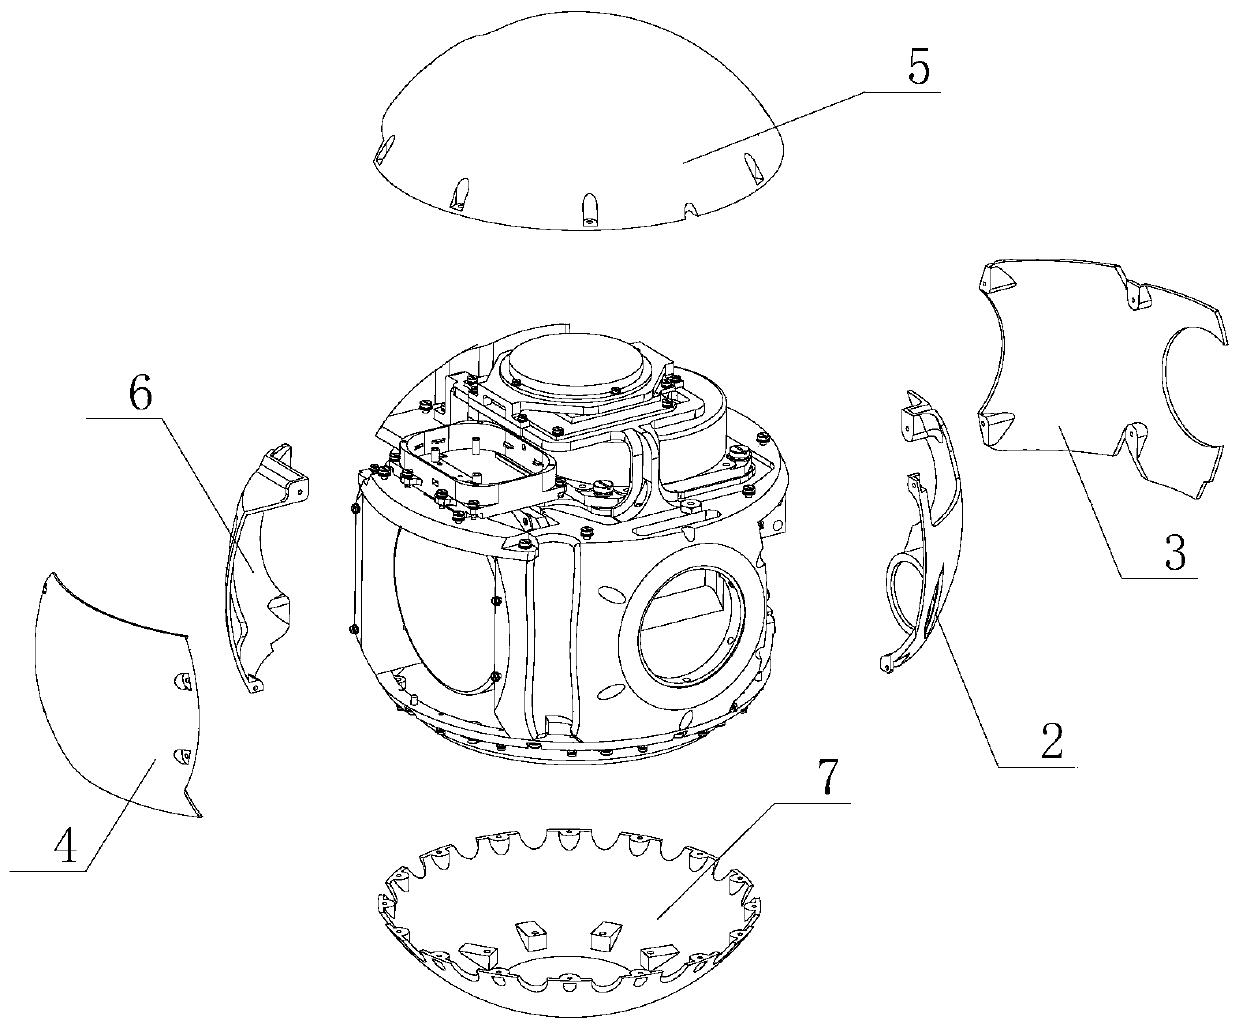 A multi-functional structure of an inertial platform spherical platform body